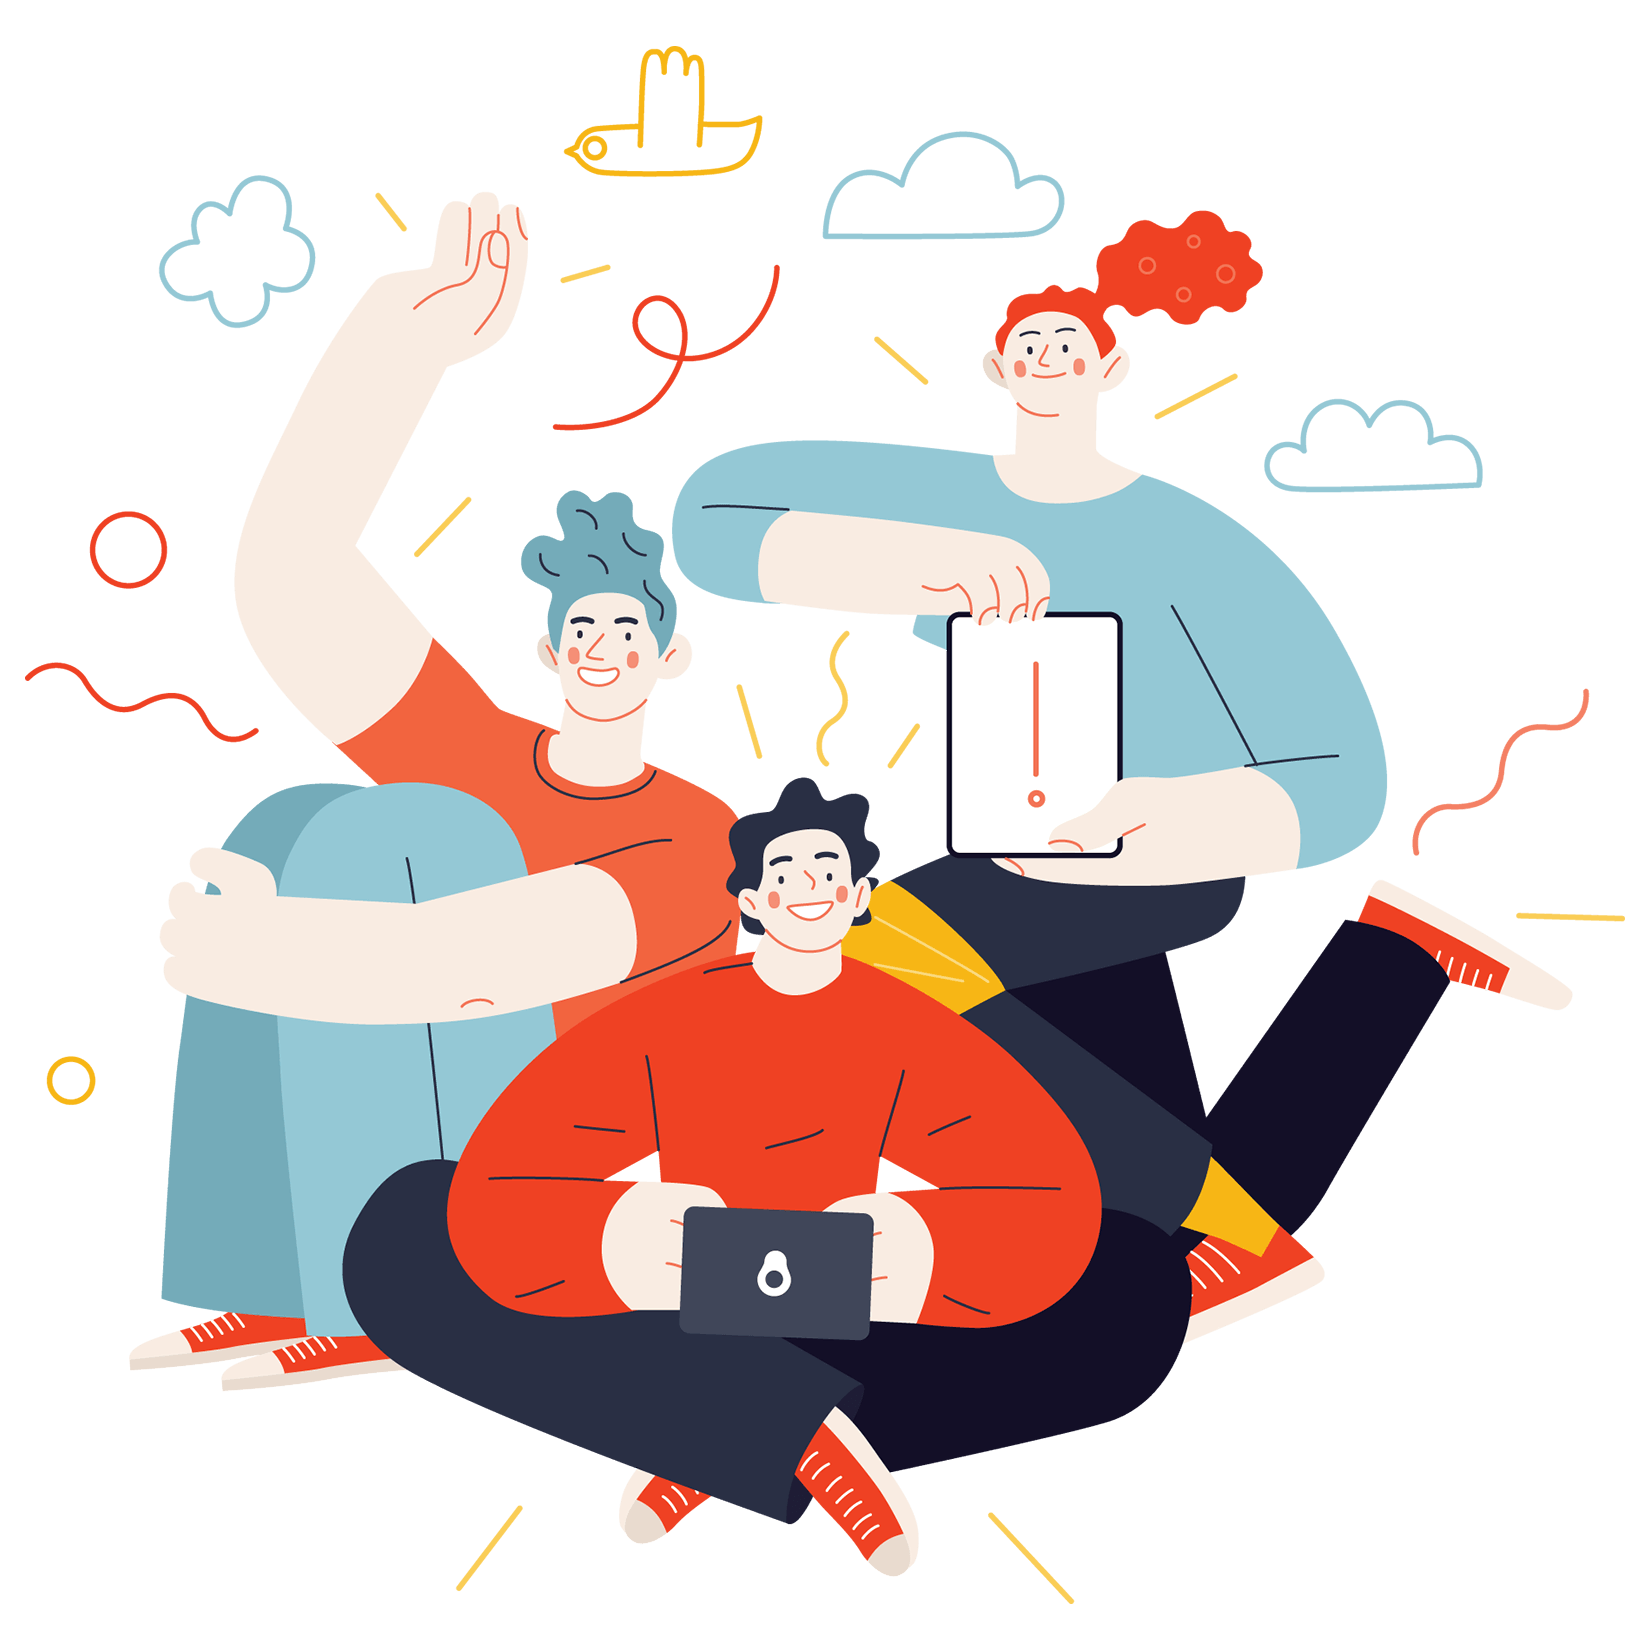 Illustration of a happy team of workers, some using devices